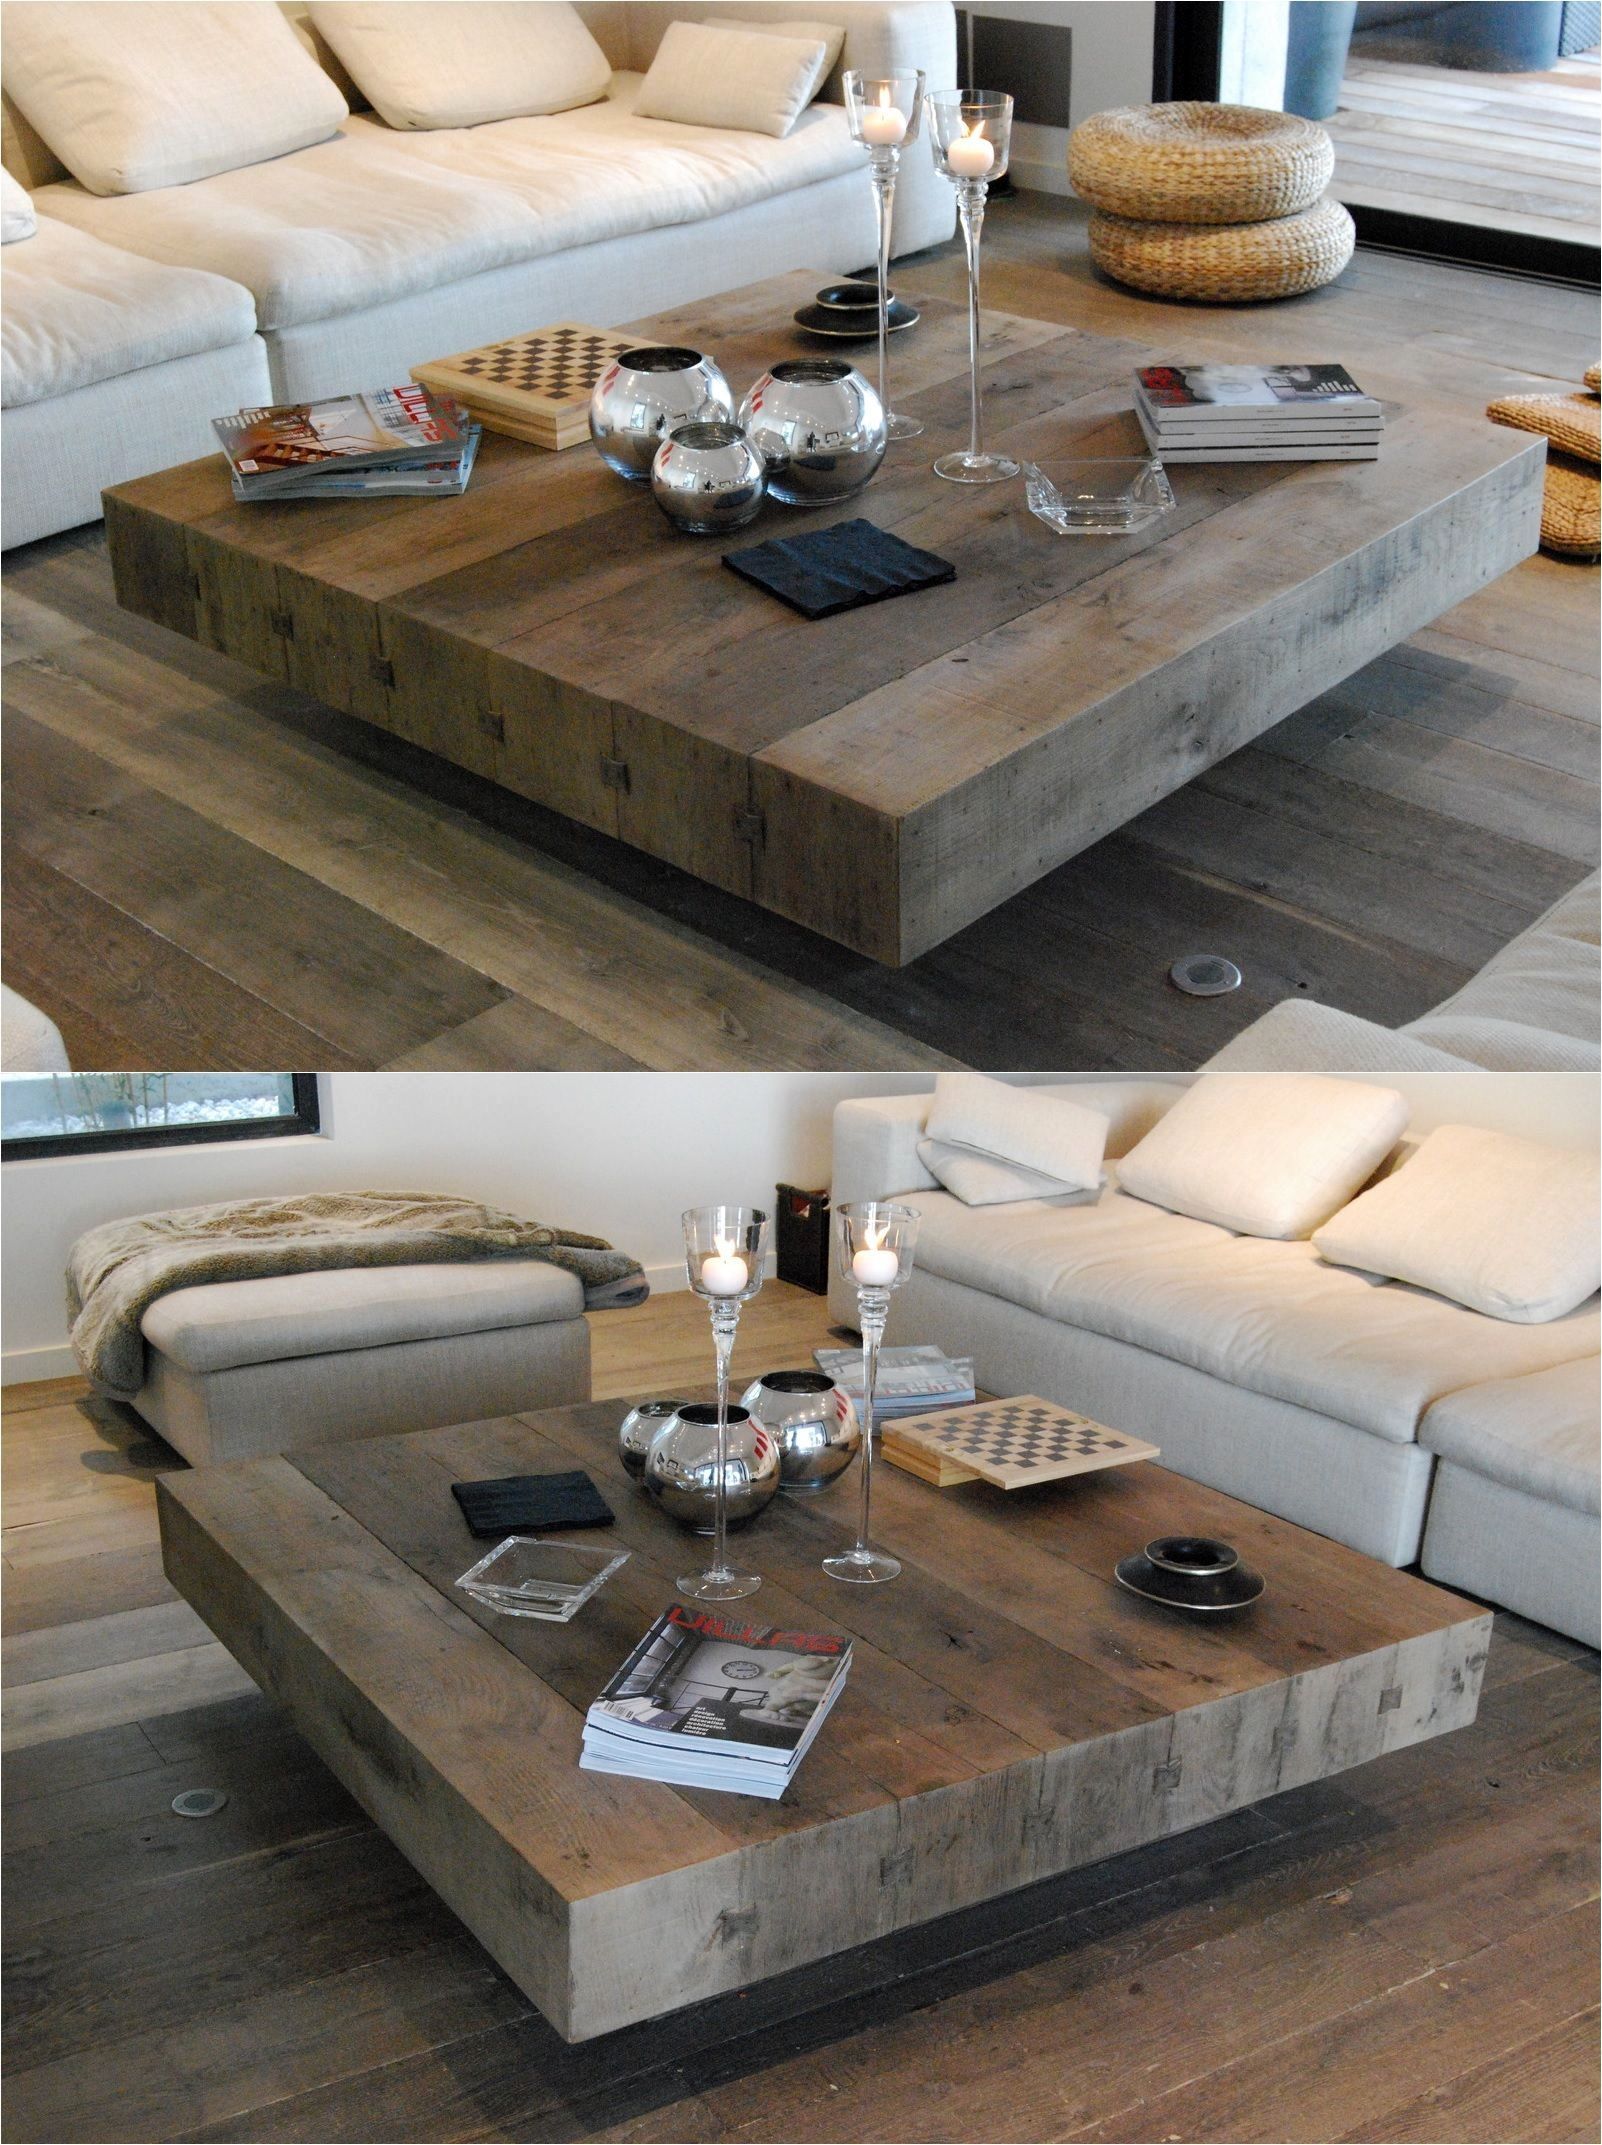 Rustic Wood And Glass Coffee Table – A Rustic Coffee Table Provides The With Regard To Rustic Coffee Tables (View 20 of 20)